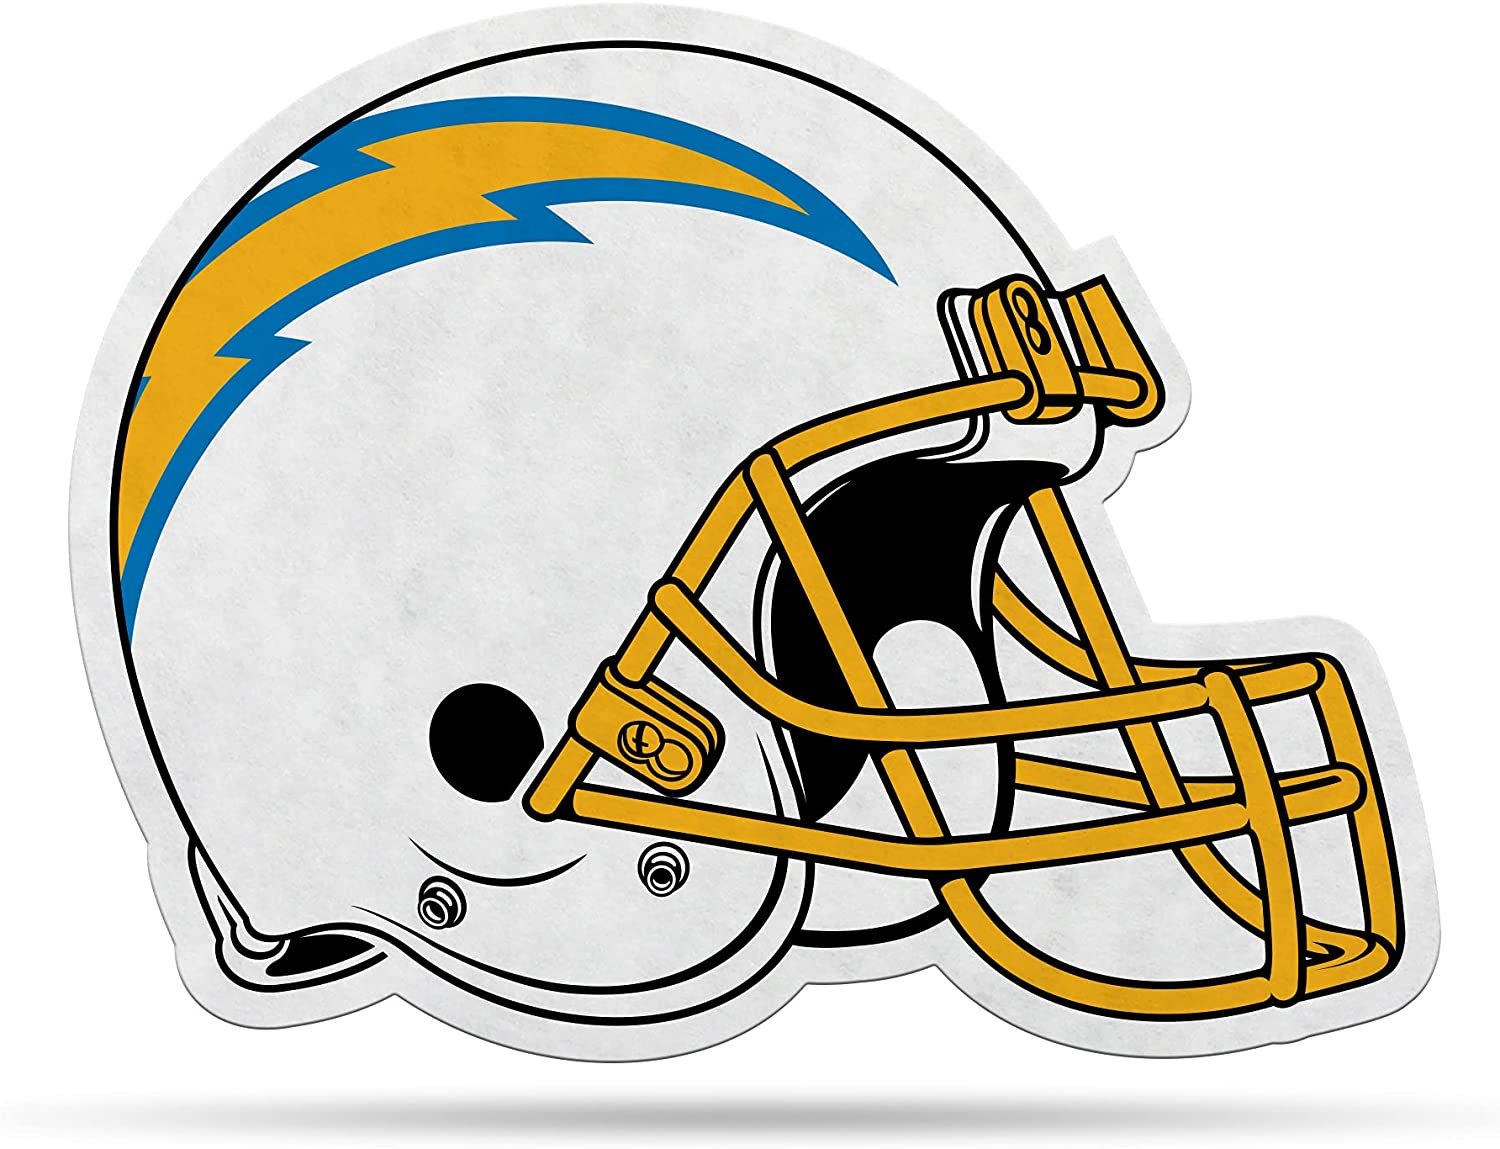 Los Angeles Chargers Soft Felt Pennant, 18 Inch, Helmet Shape, Easy to Hang, Home or Office